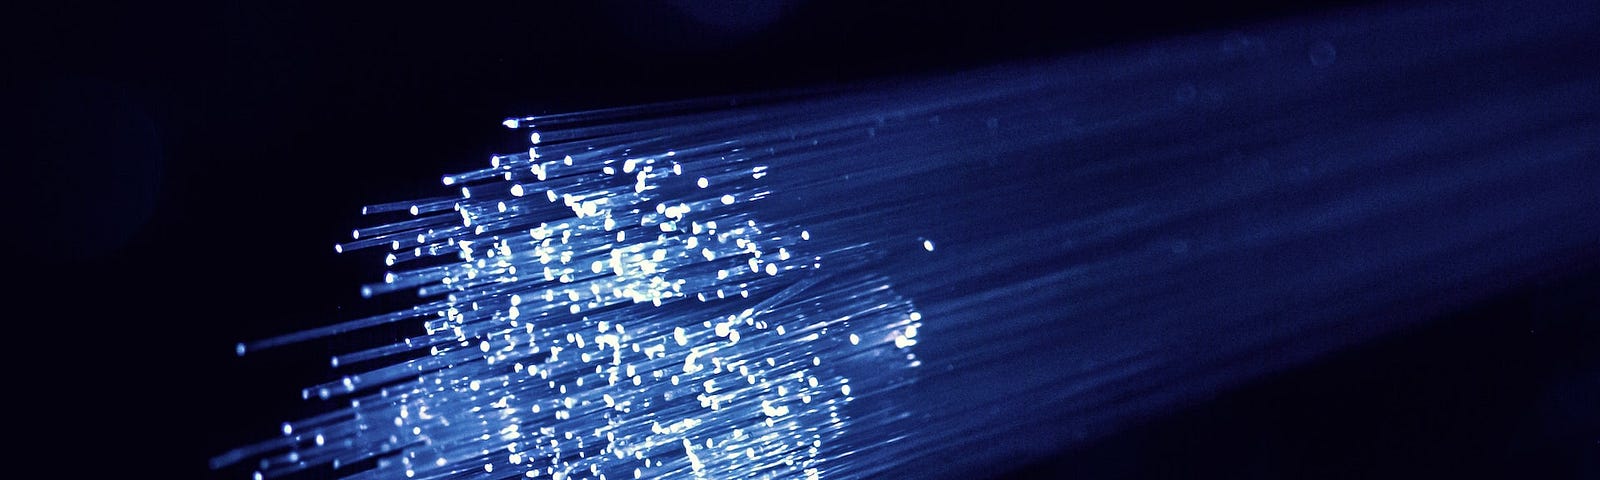 IMAGE: A bunch of fiber optic cables with their ends cut and illuminated